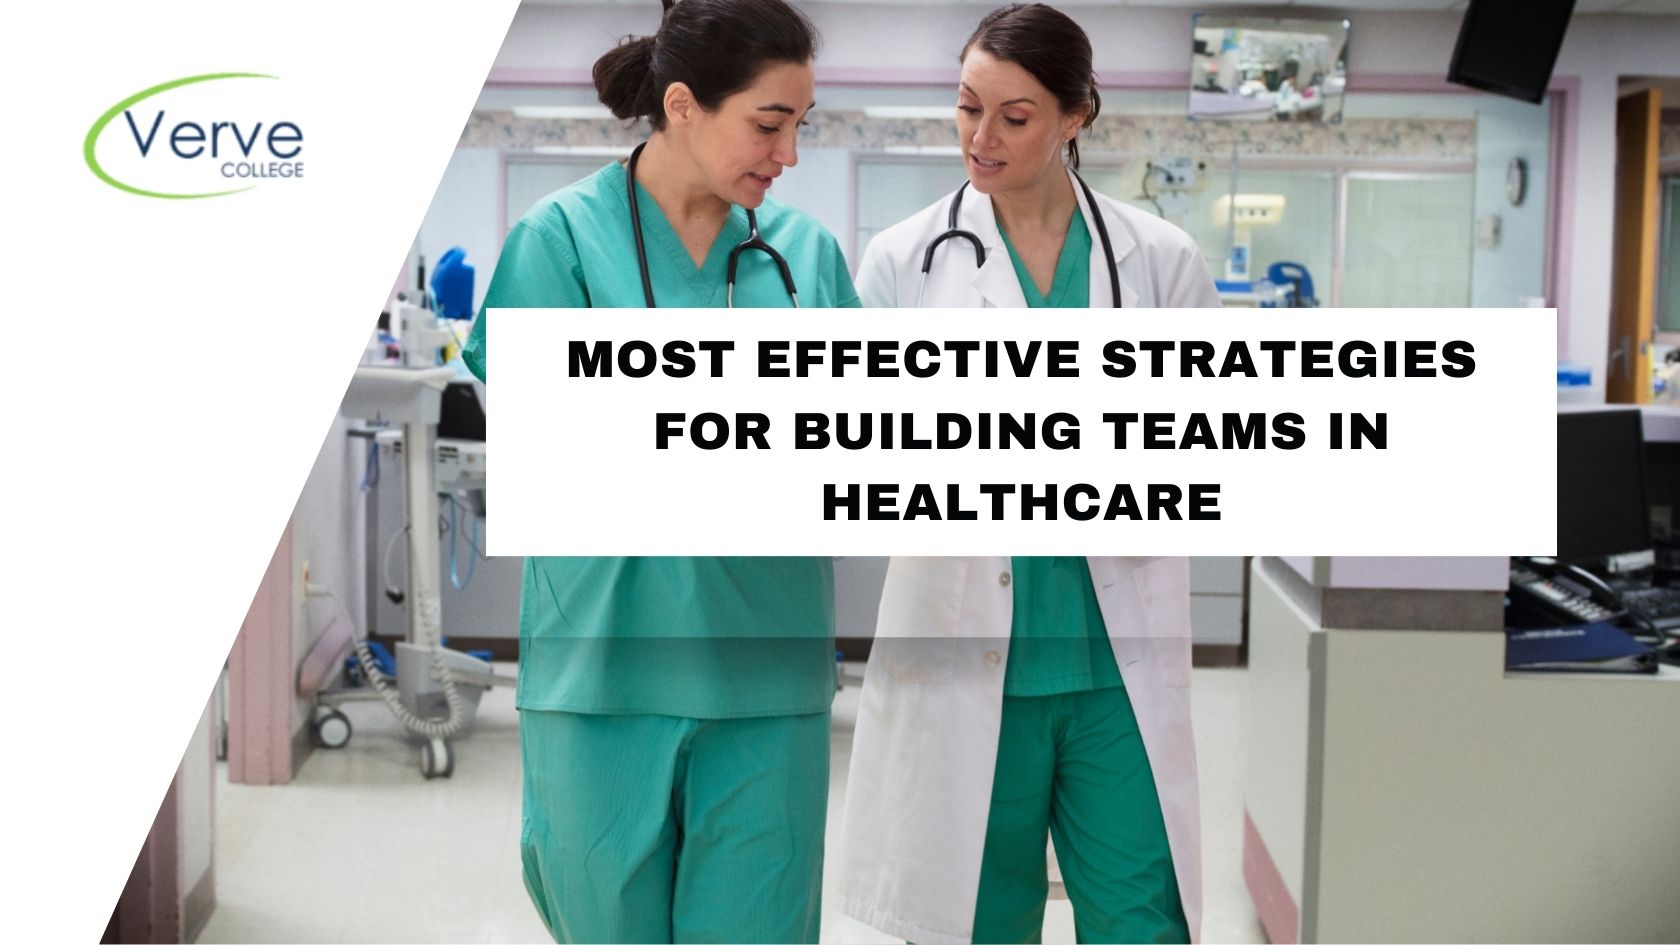 What Are the Most Effective Strategies for Building Teams in Healthcare?